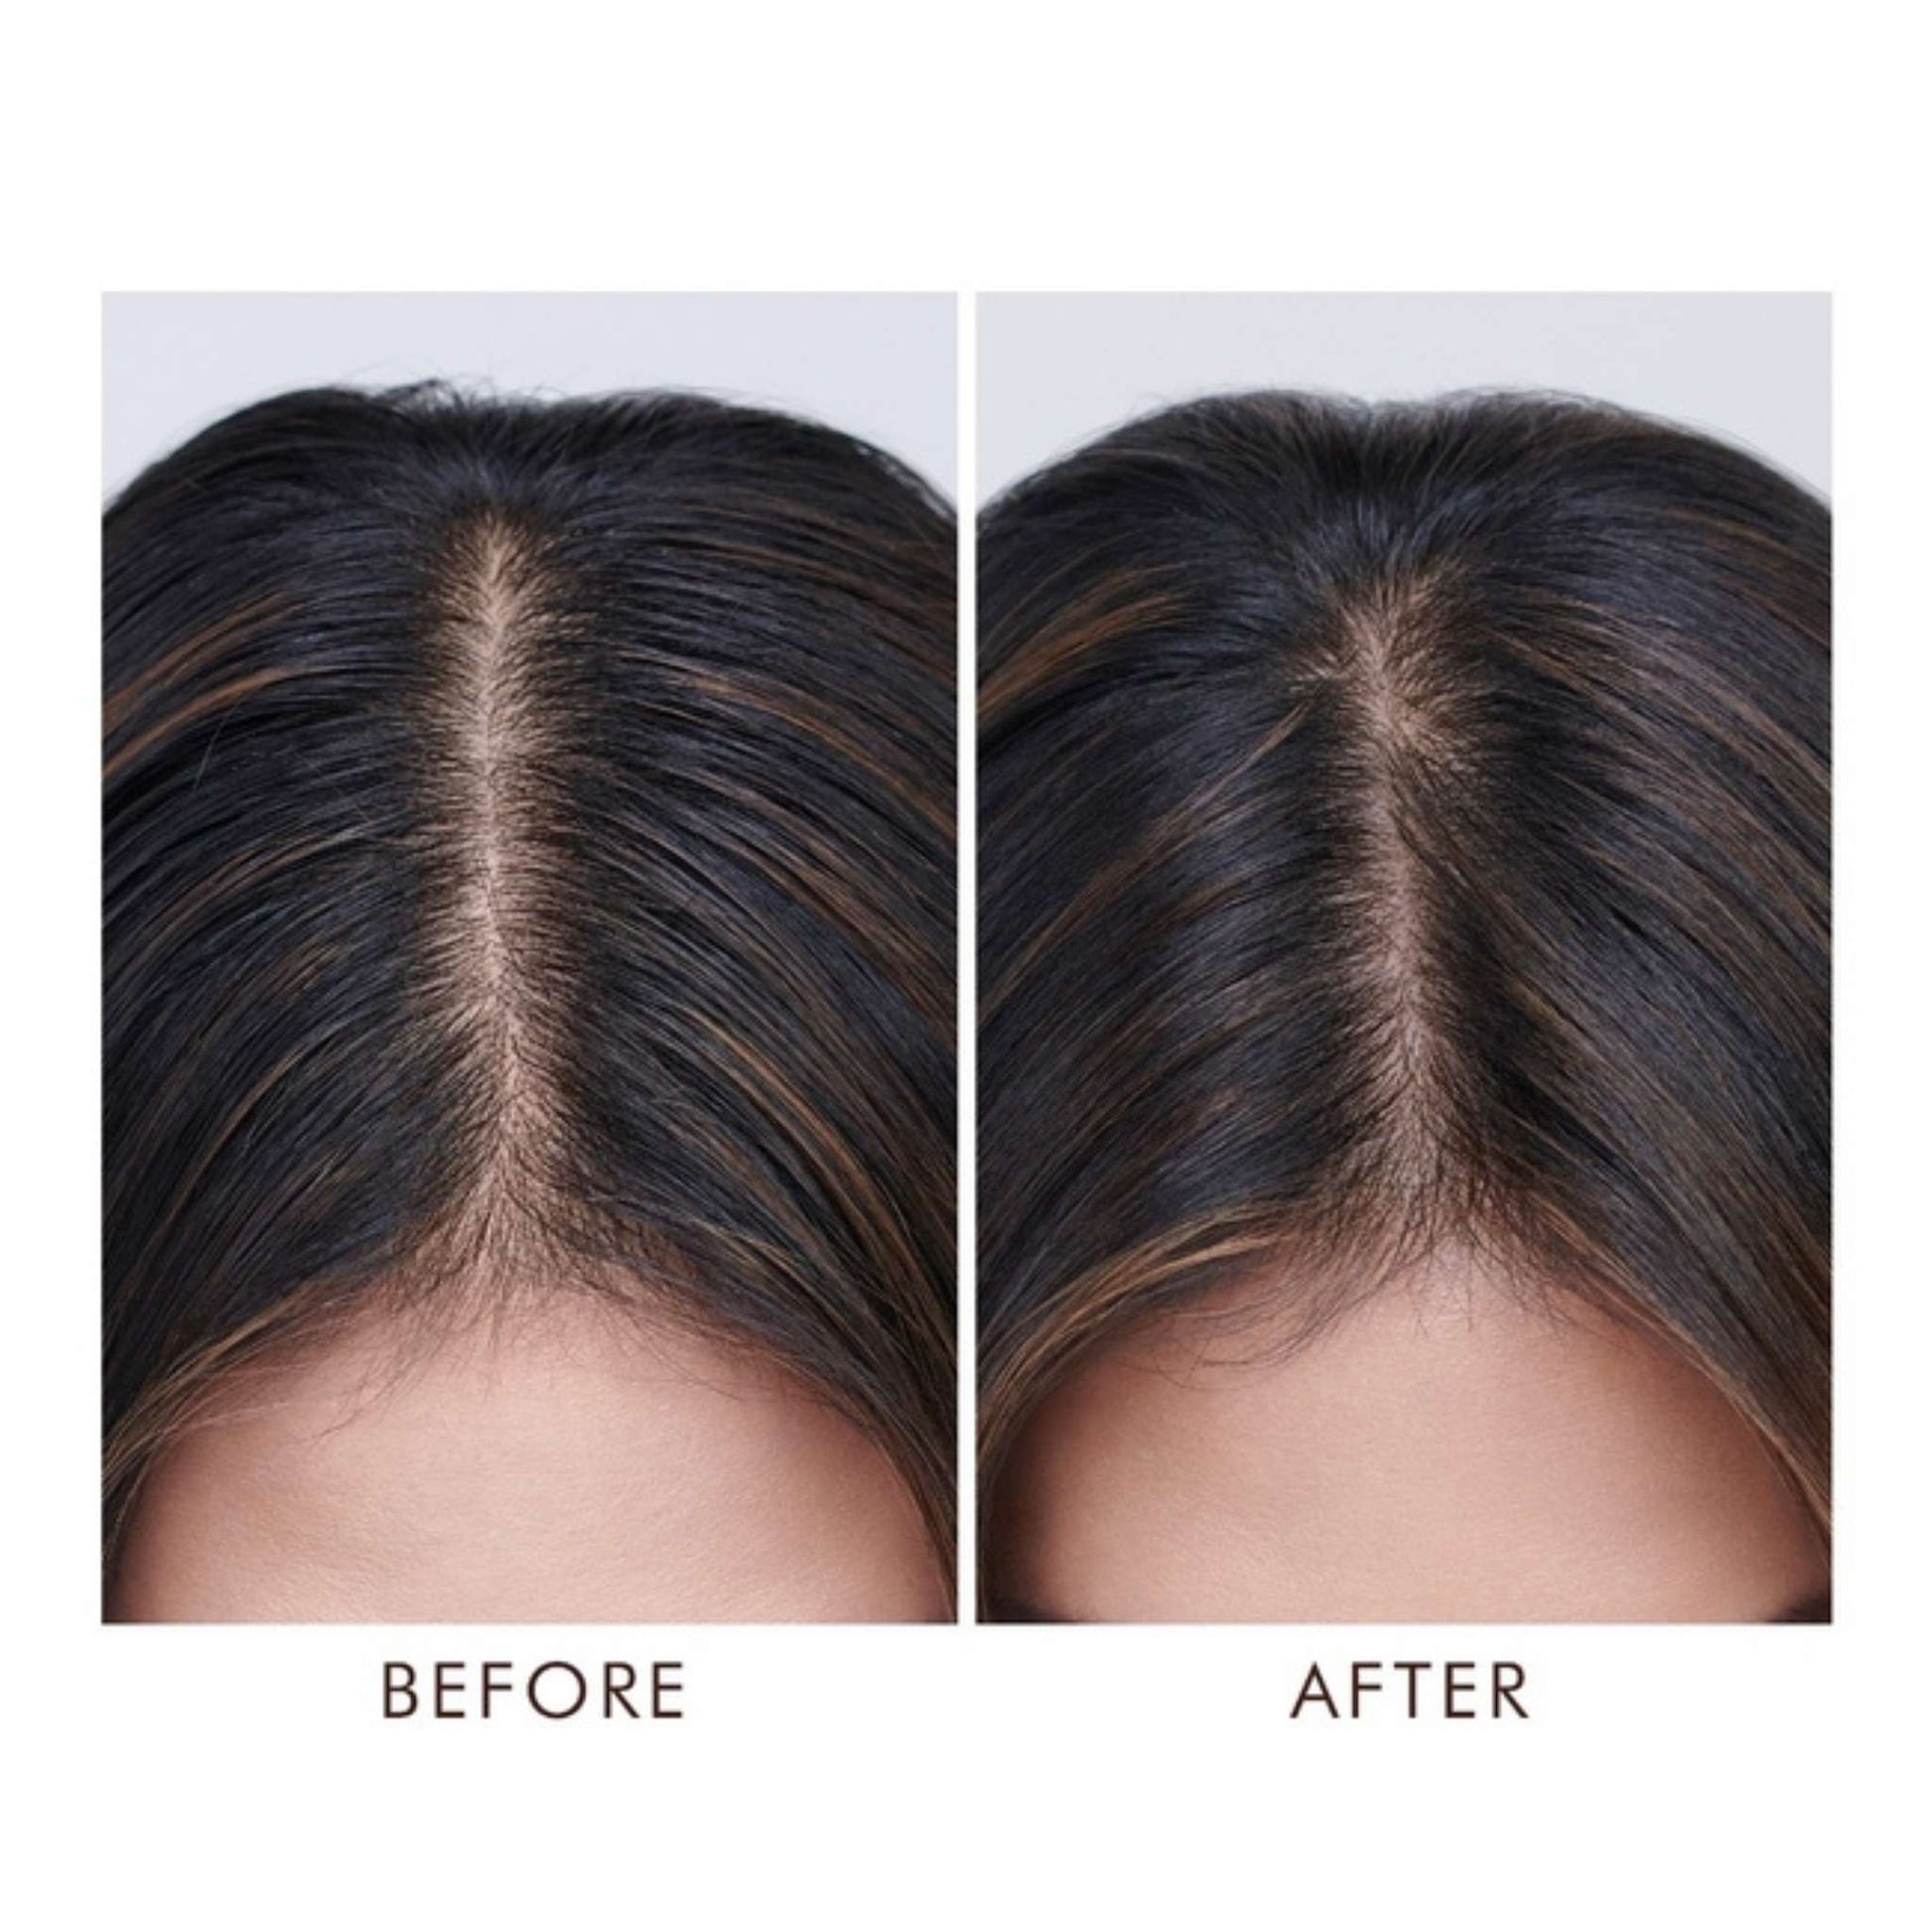 Moroccanoil Oily Scalp Treatment before and after